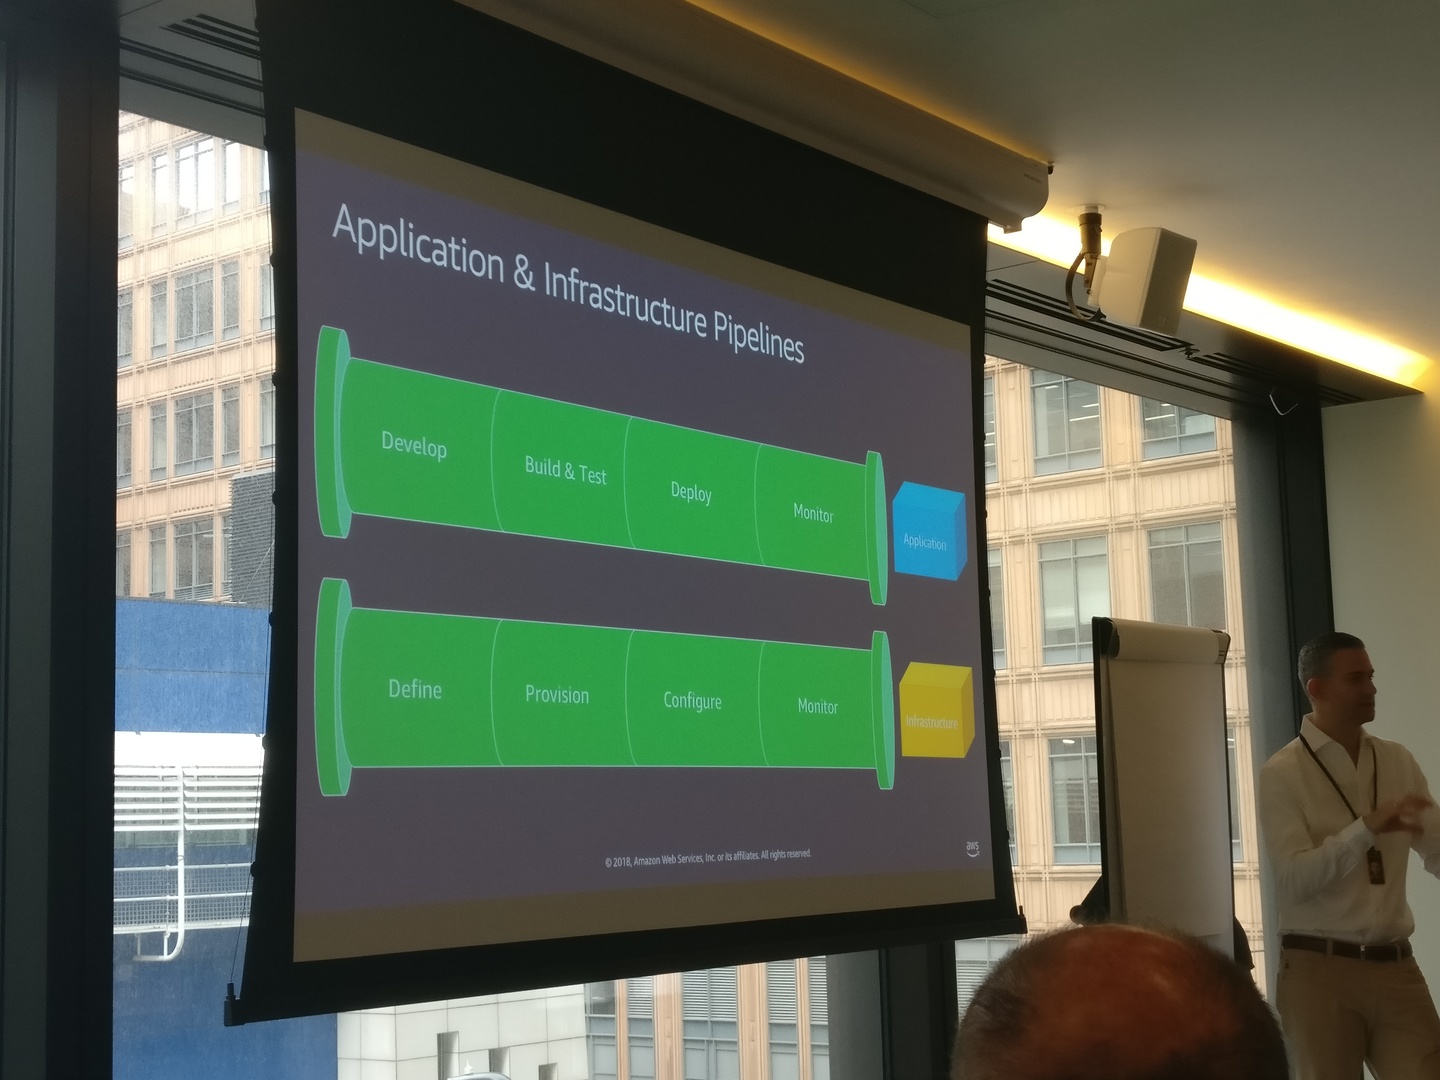 Application pipelines working differently to infrastructure pipelines